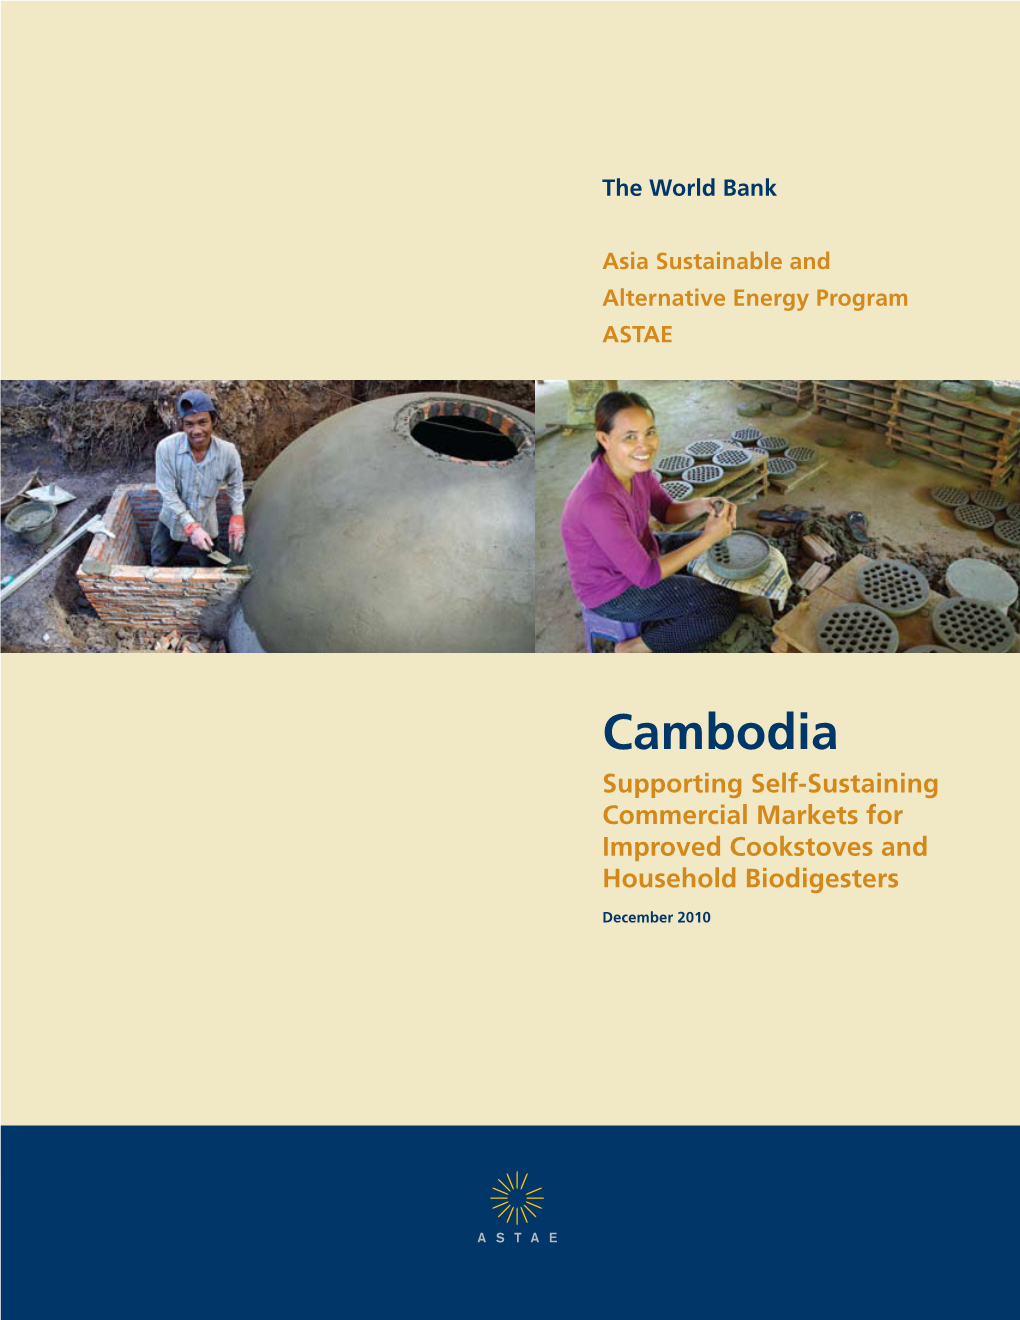 Cambodia Supporting Self-Sustaining Commercial Markets for Improved Cookstoves and Household Biodigesters